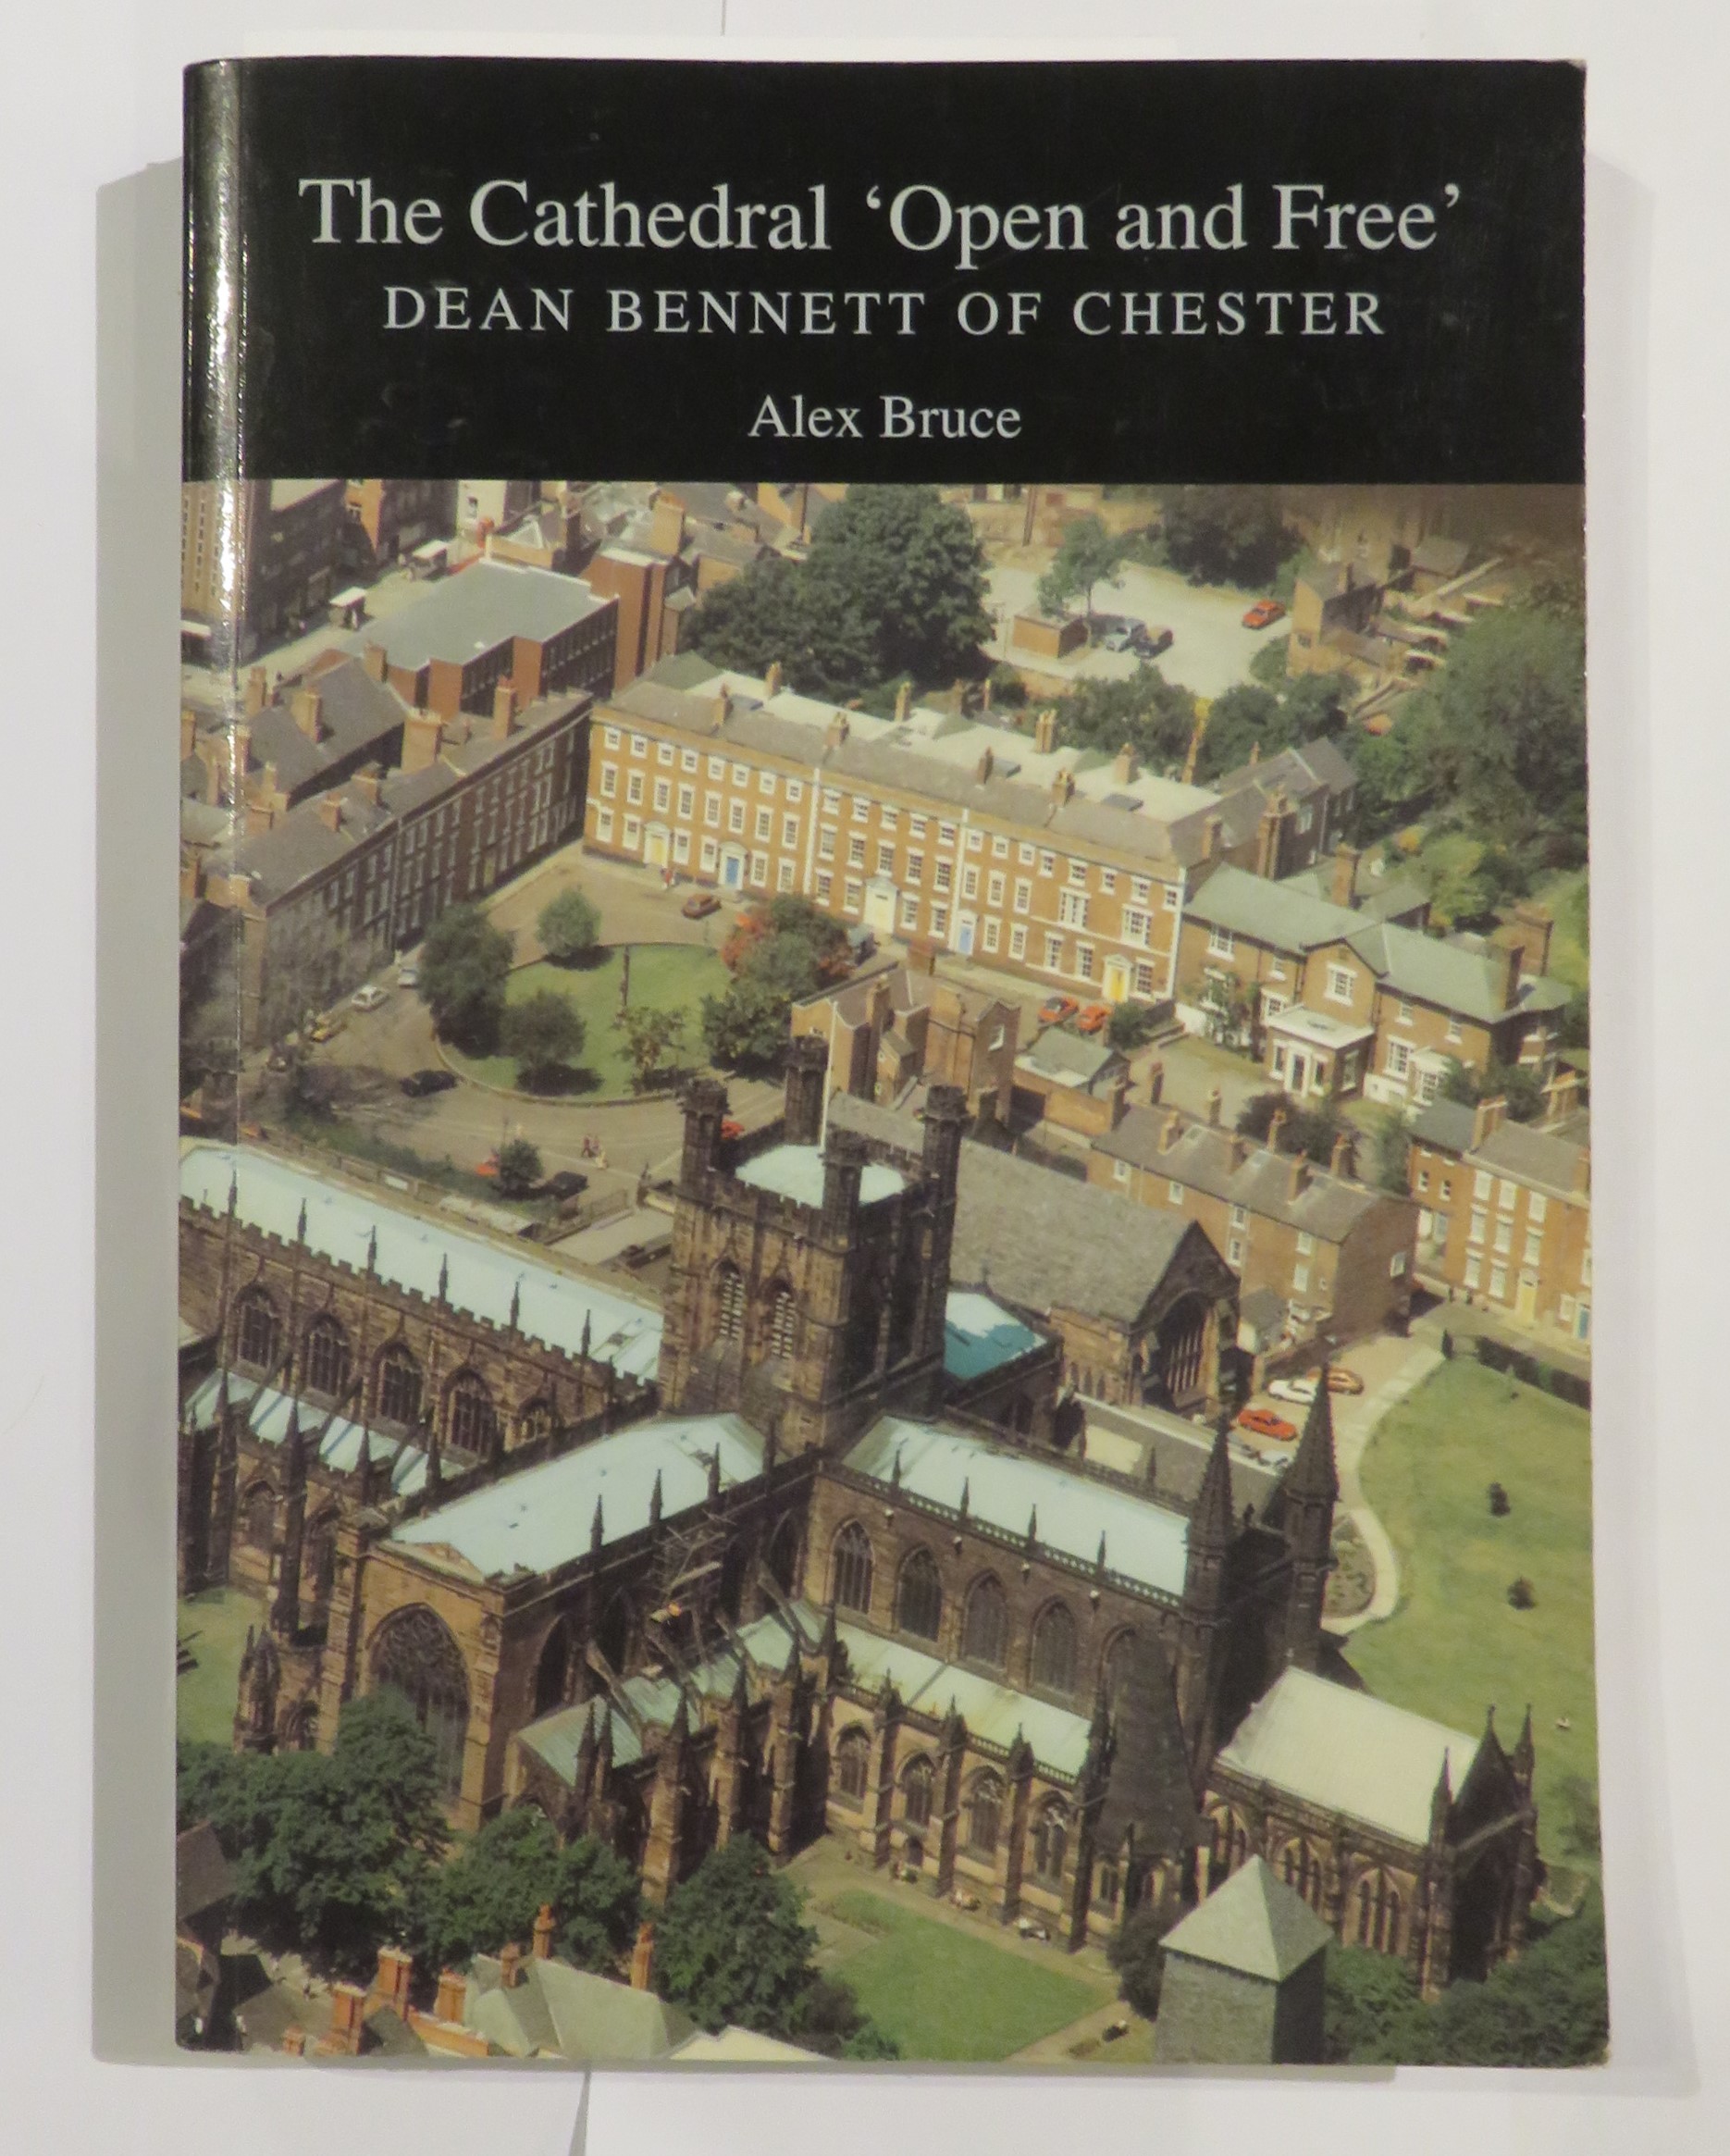 The Cathedral 'Open and Free': Dean Bennett of Chester